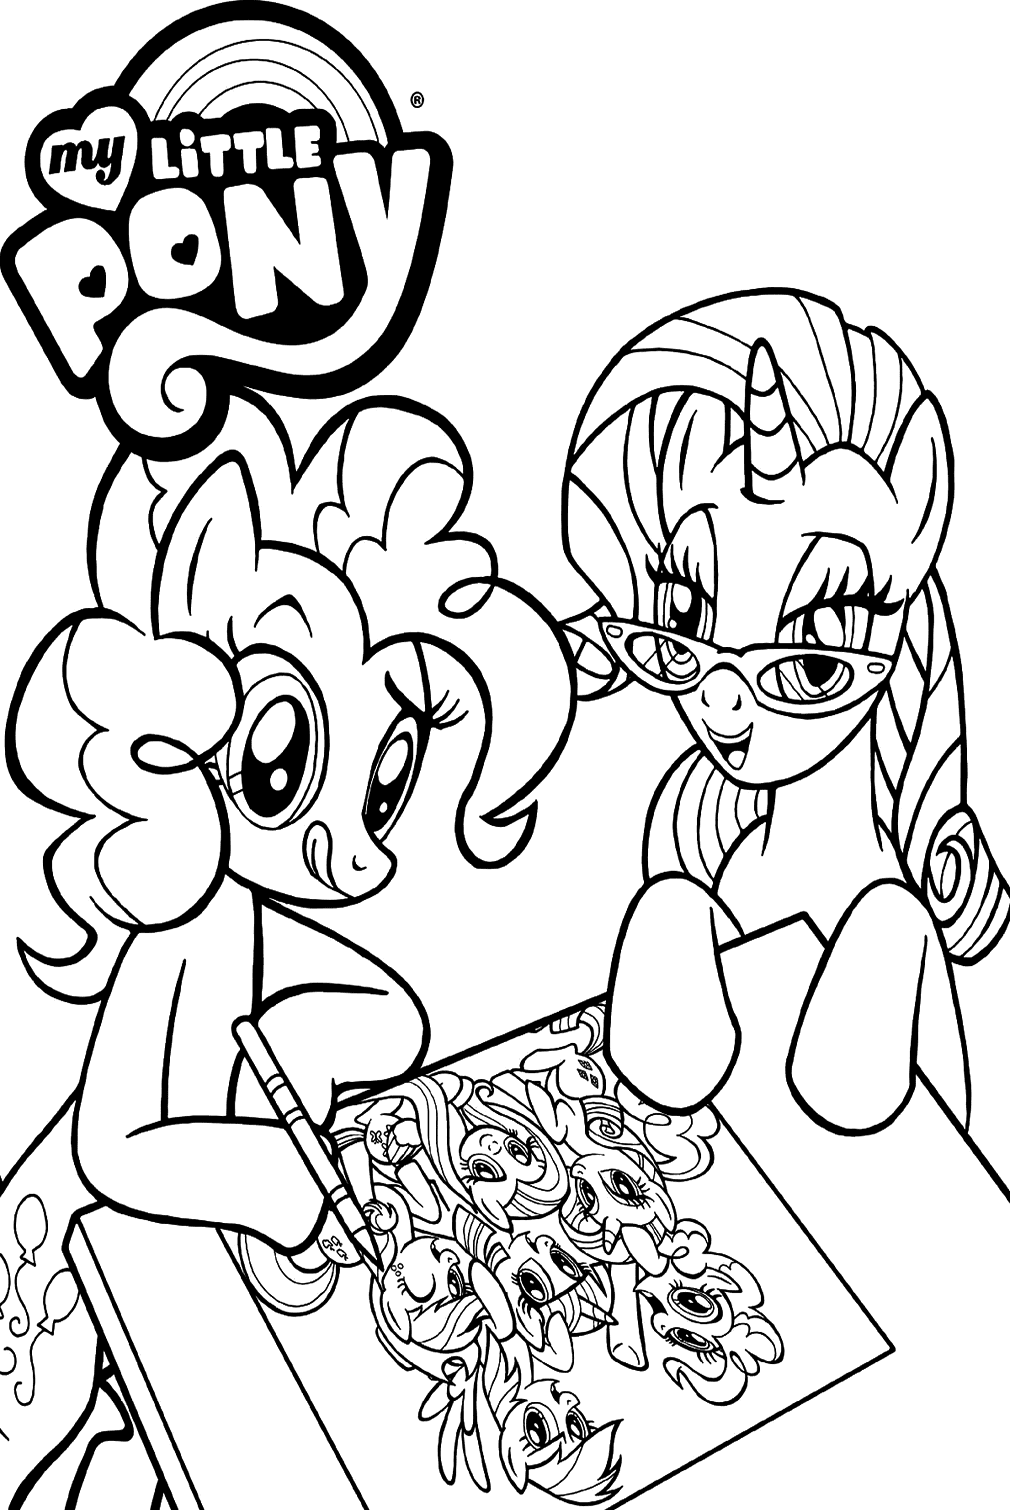 Rarity Pony Coloring Page